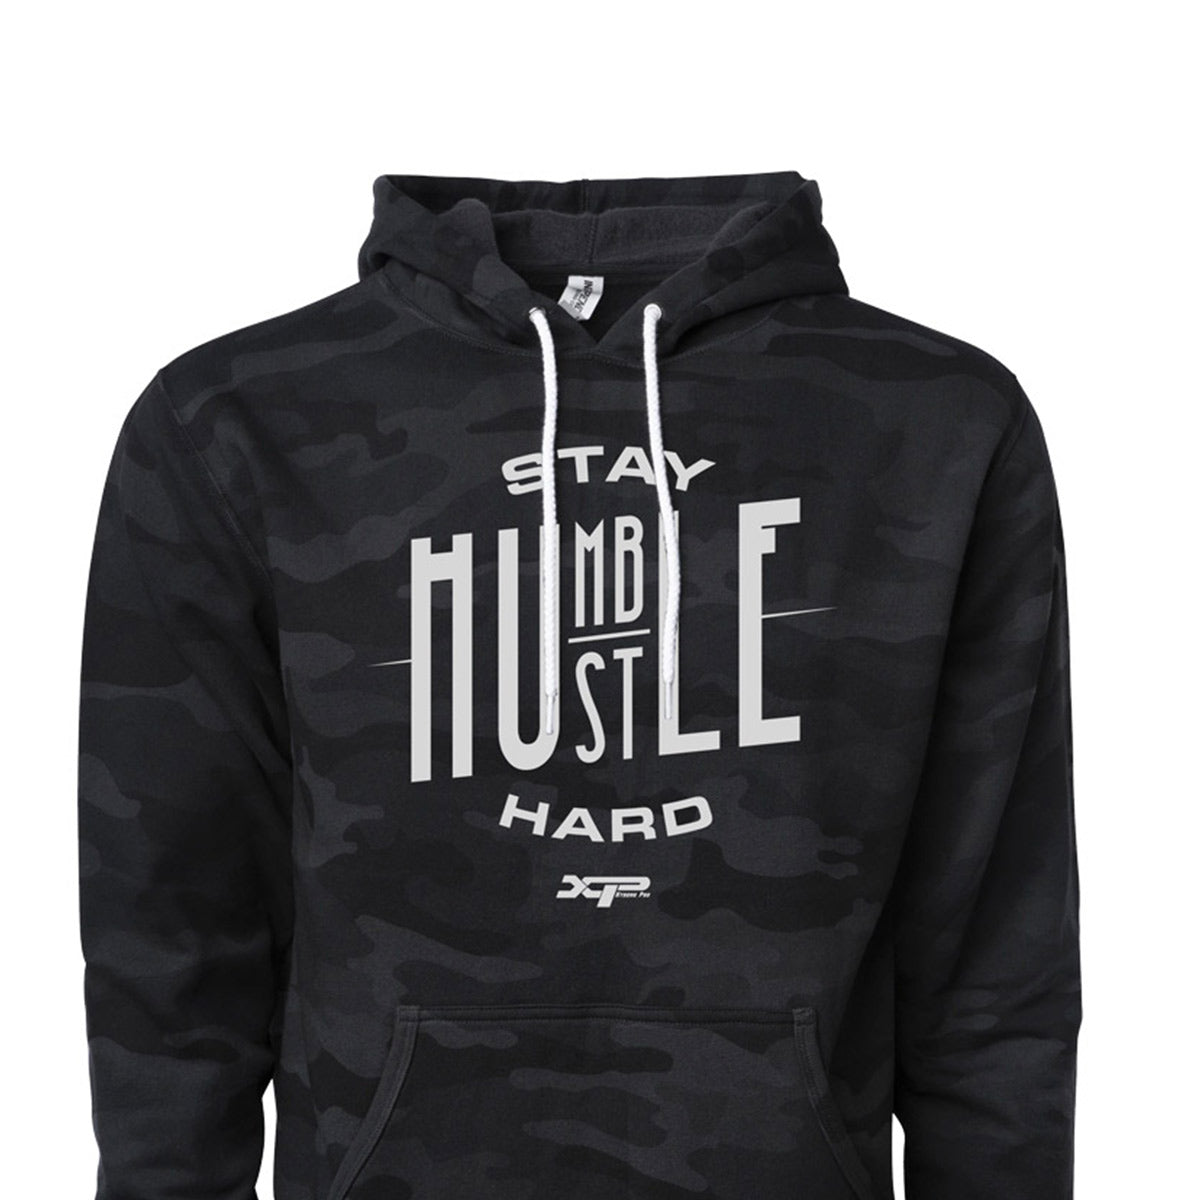 Stay Humble Hustle Hard Super Soft Hoodie in Black Camo Xtreme Pro Apparel